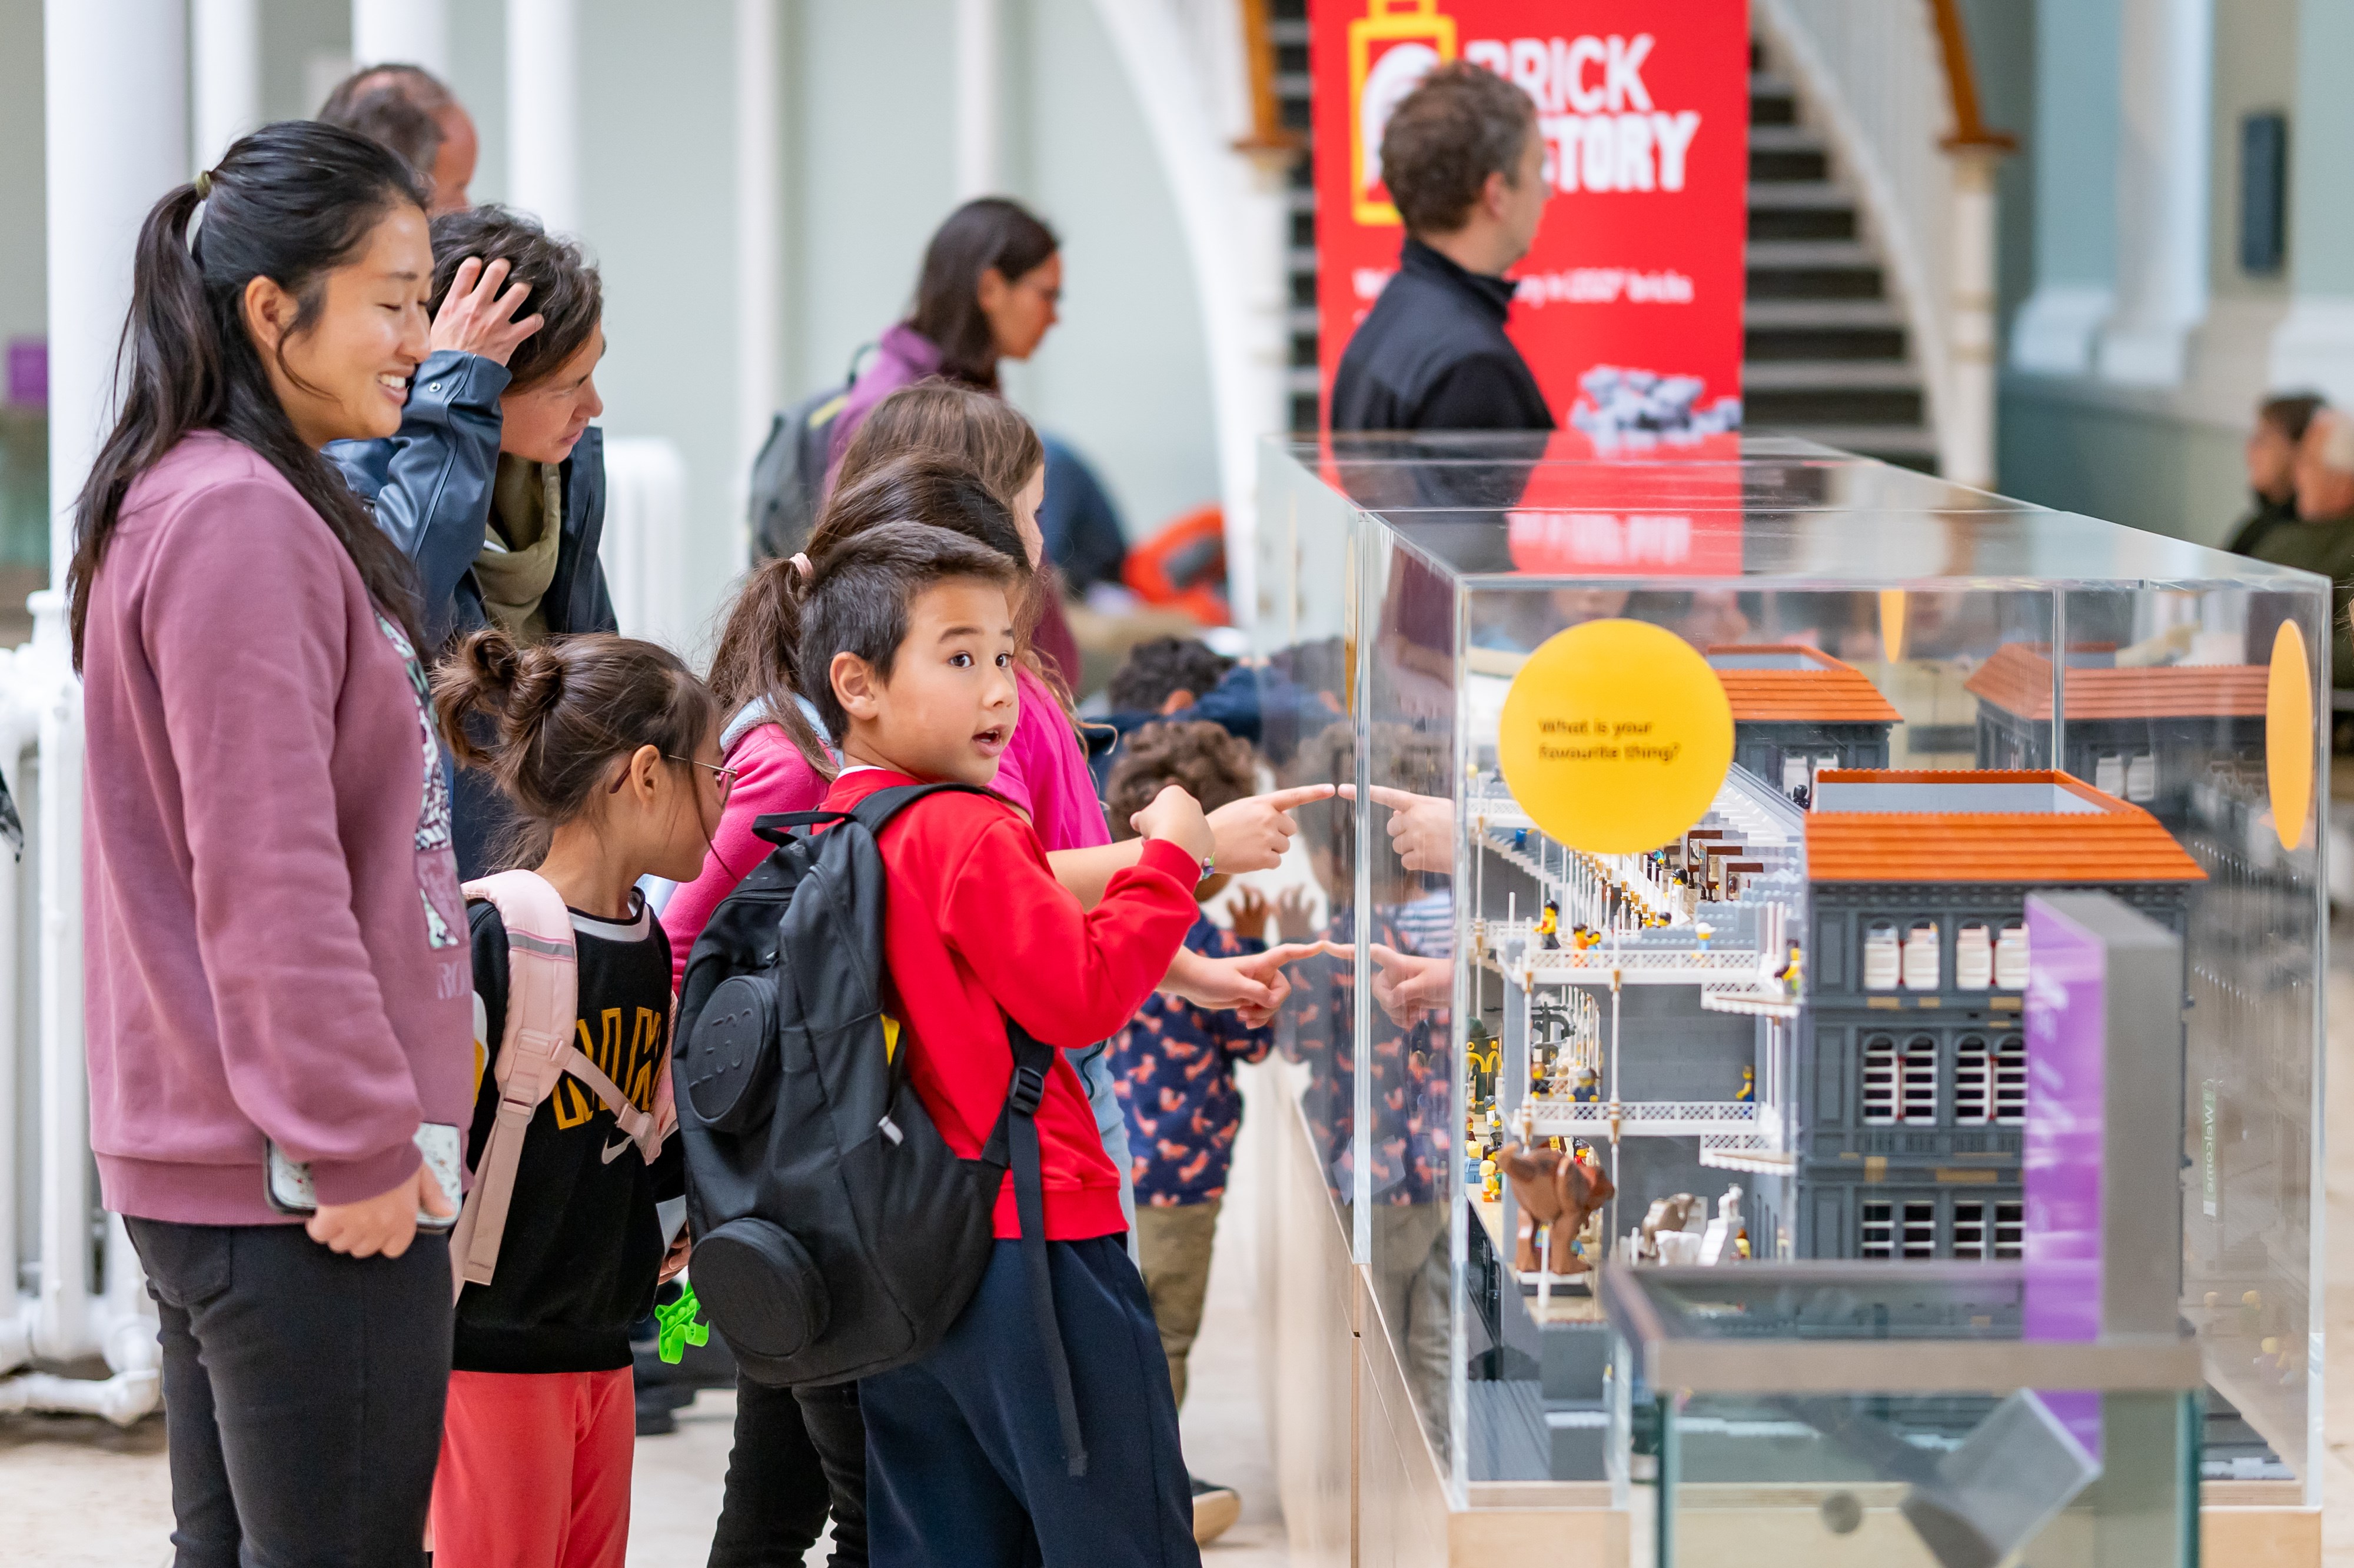 A child is pointing at a display case at the National Museum of Scotland, and looks excited.